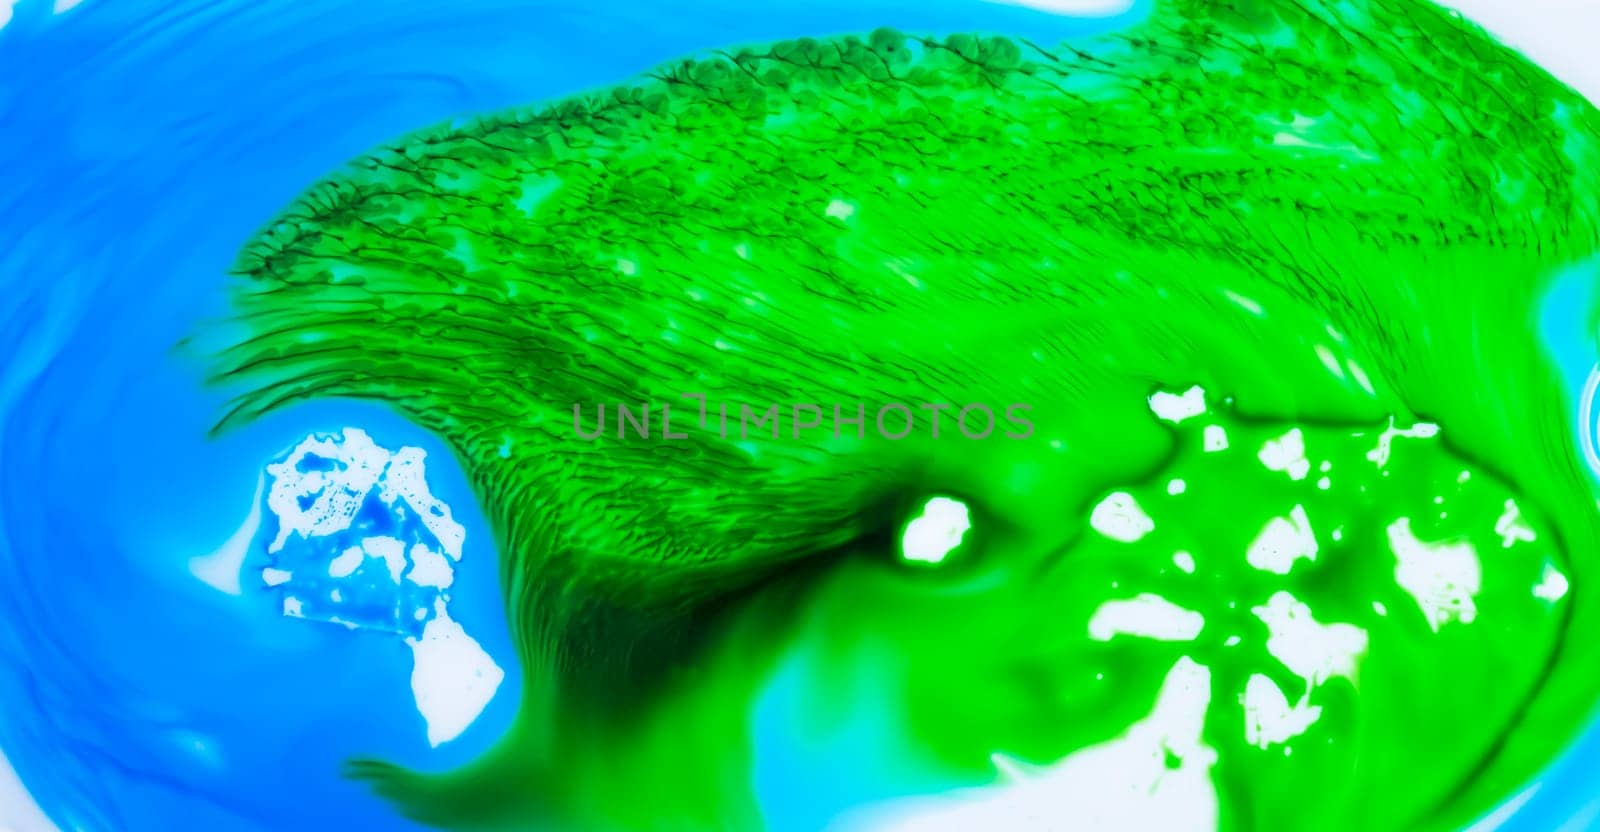 blue and green paint background. Beautiful abstraction of liquid paints by jackreznor